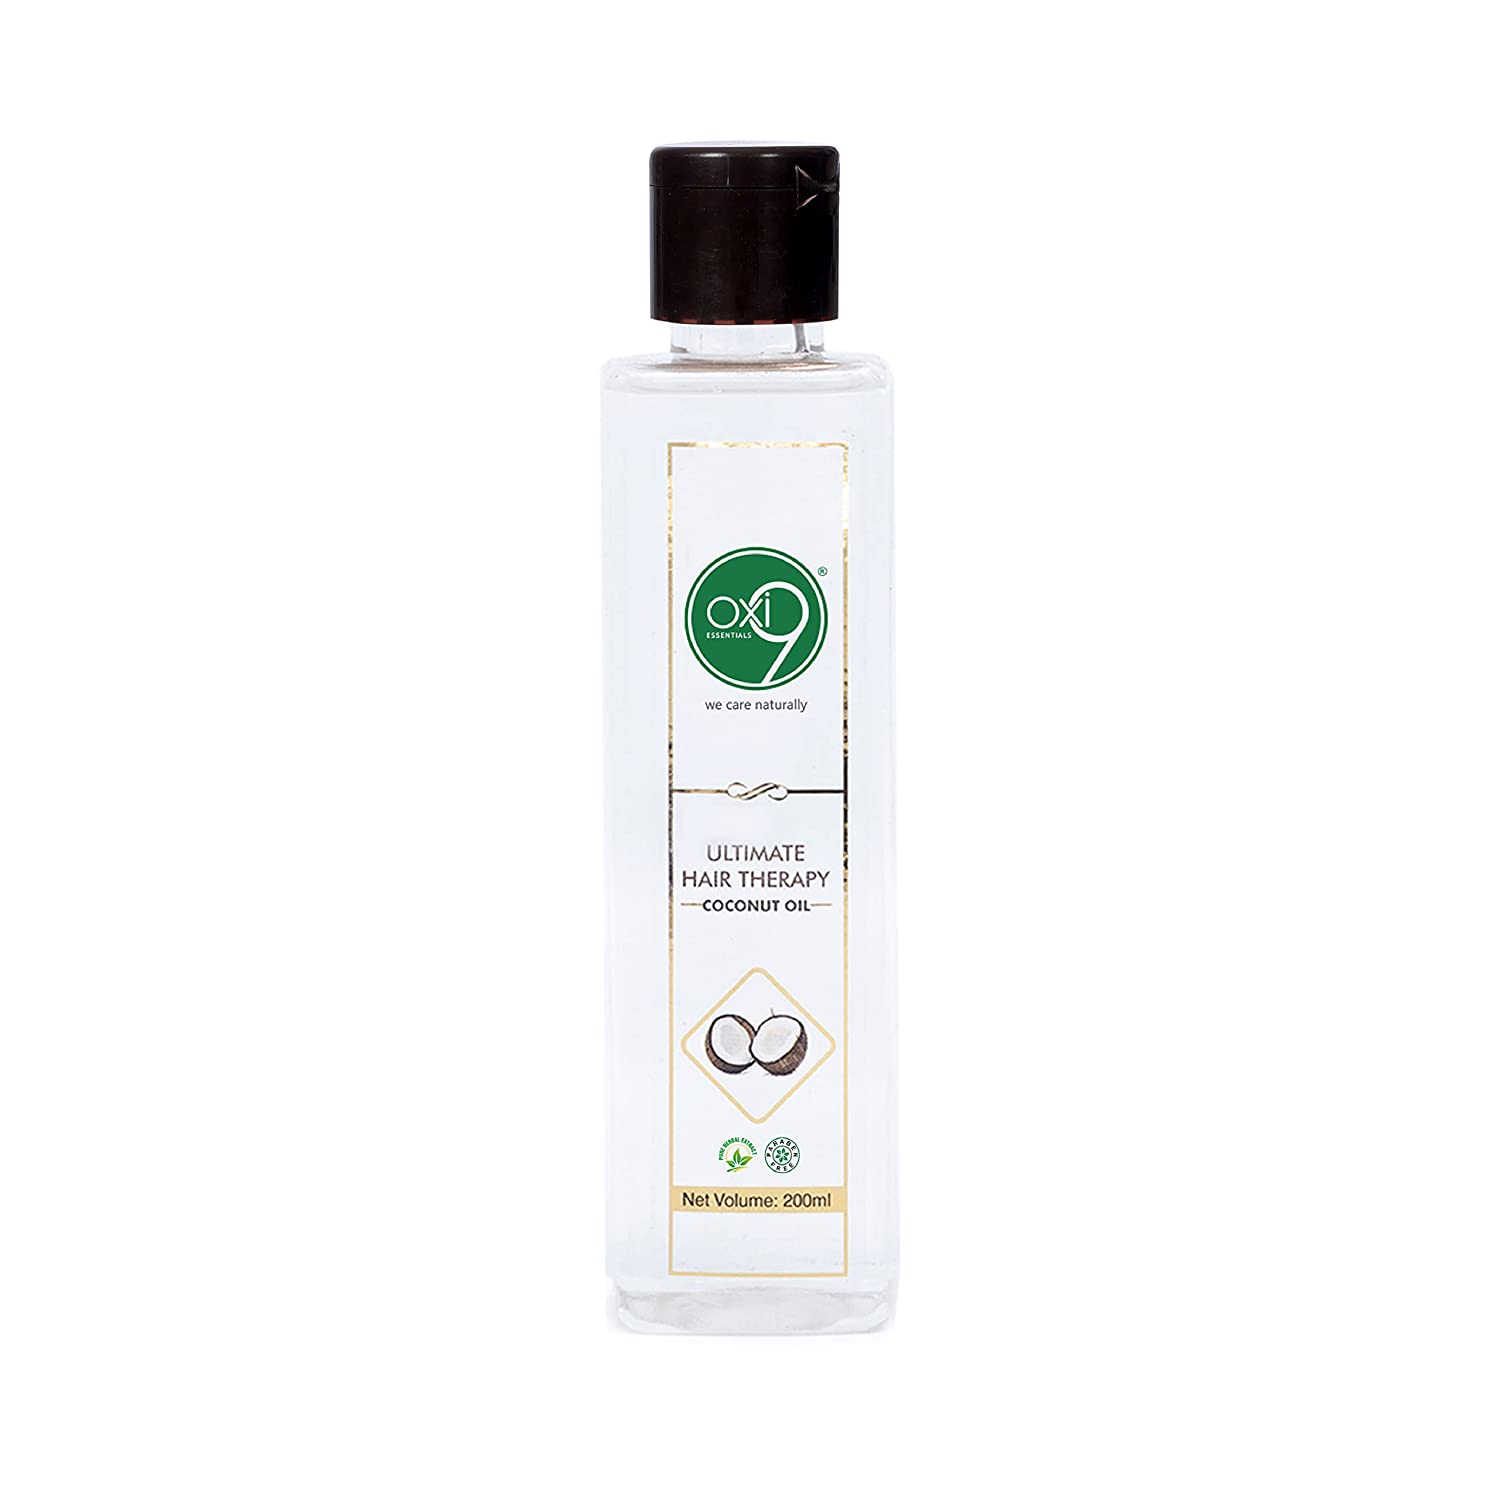 Ultimate Hair Therapy Coconut Oil 200 ml | Paraben Free 